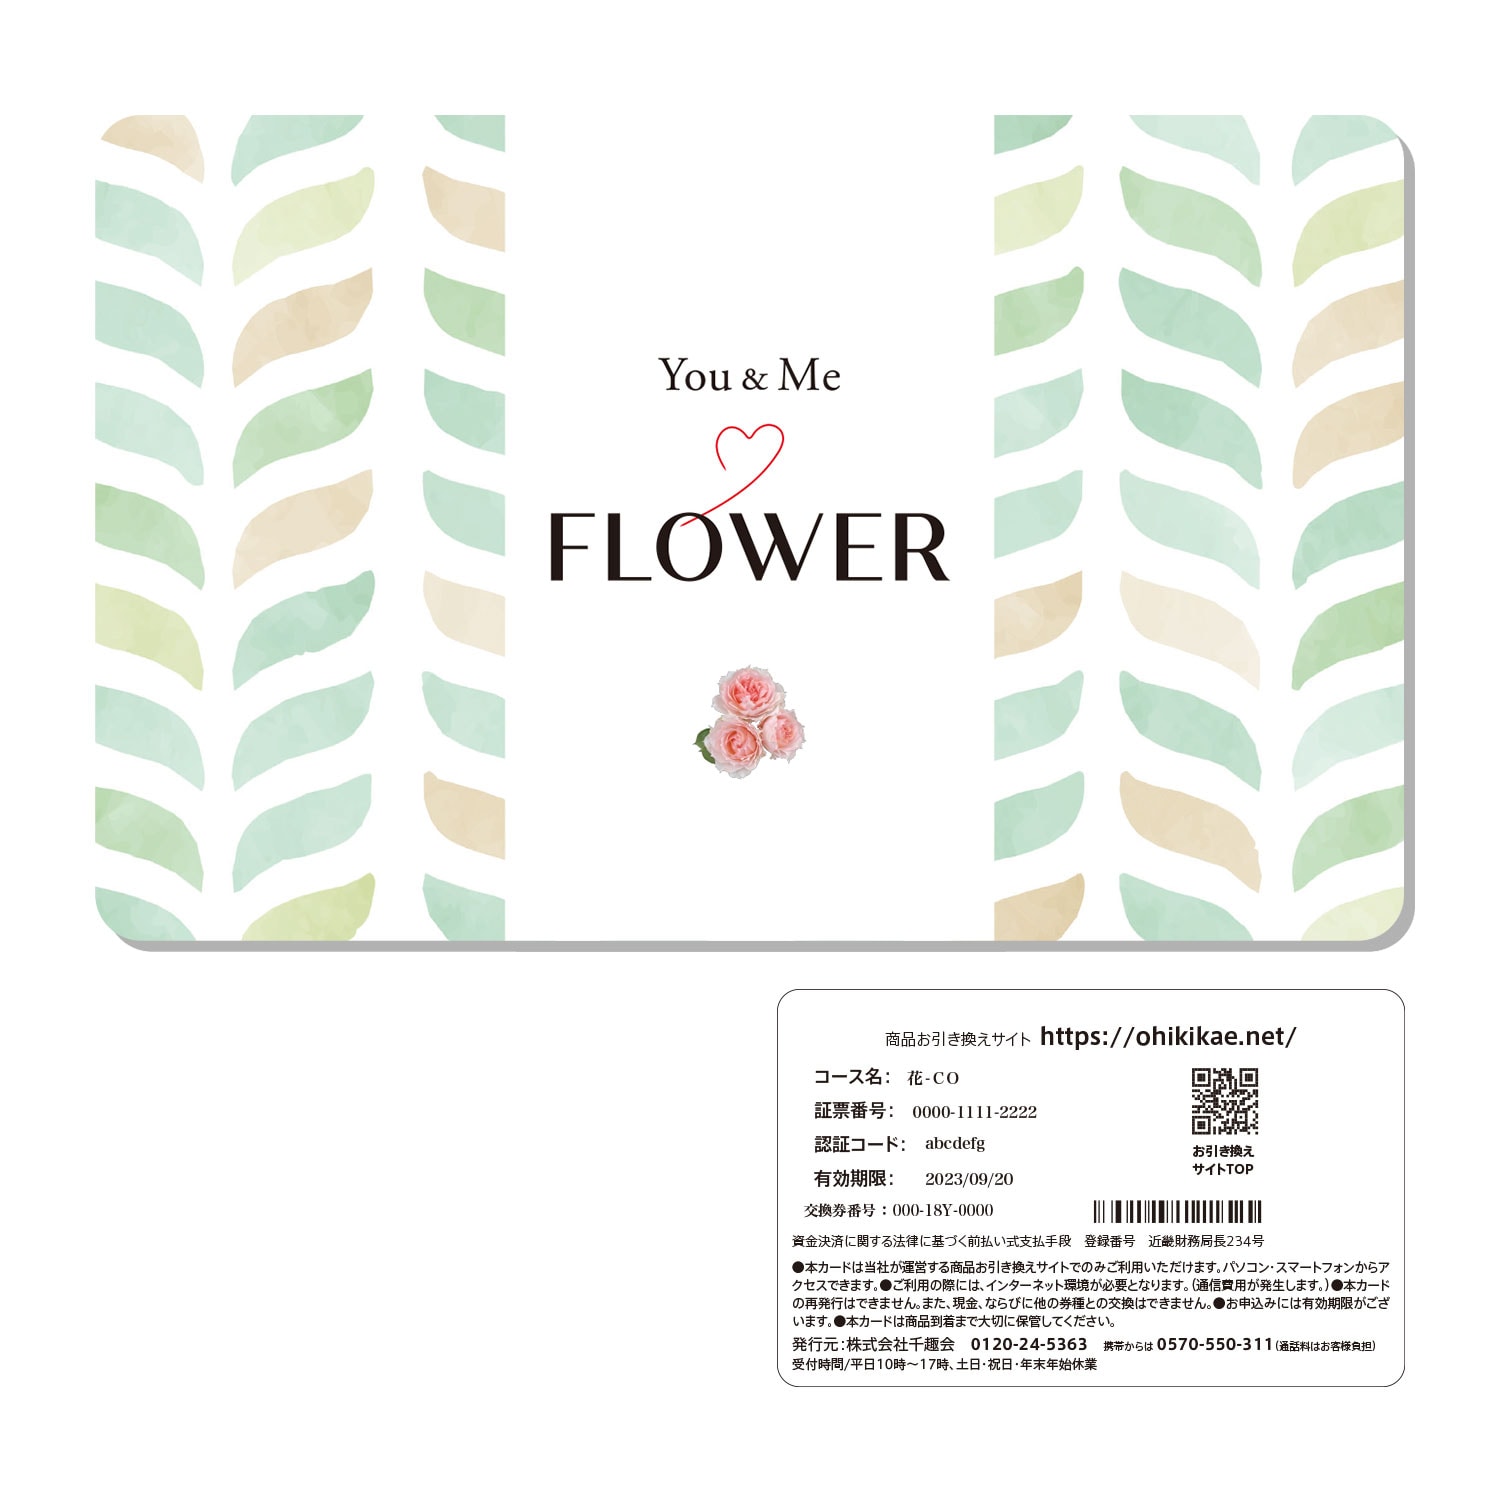 【You&Me】【送料無料】【カードギフト】花を愛するひとに お花ギフトカード「You&Me FLOWER」＜ＣＯ＞ - -,-